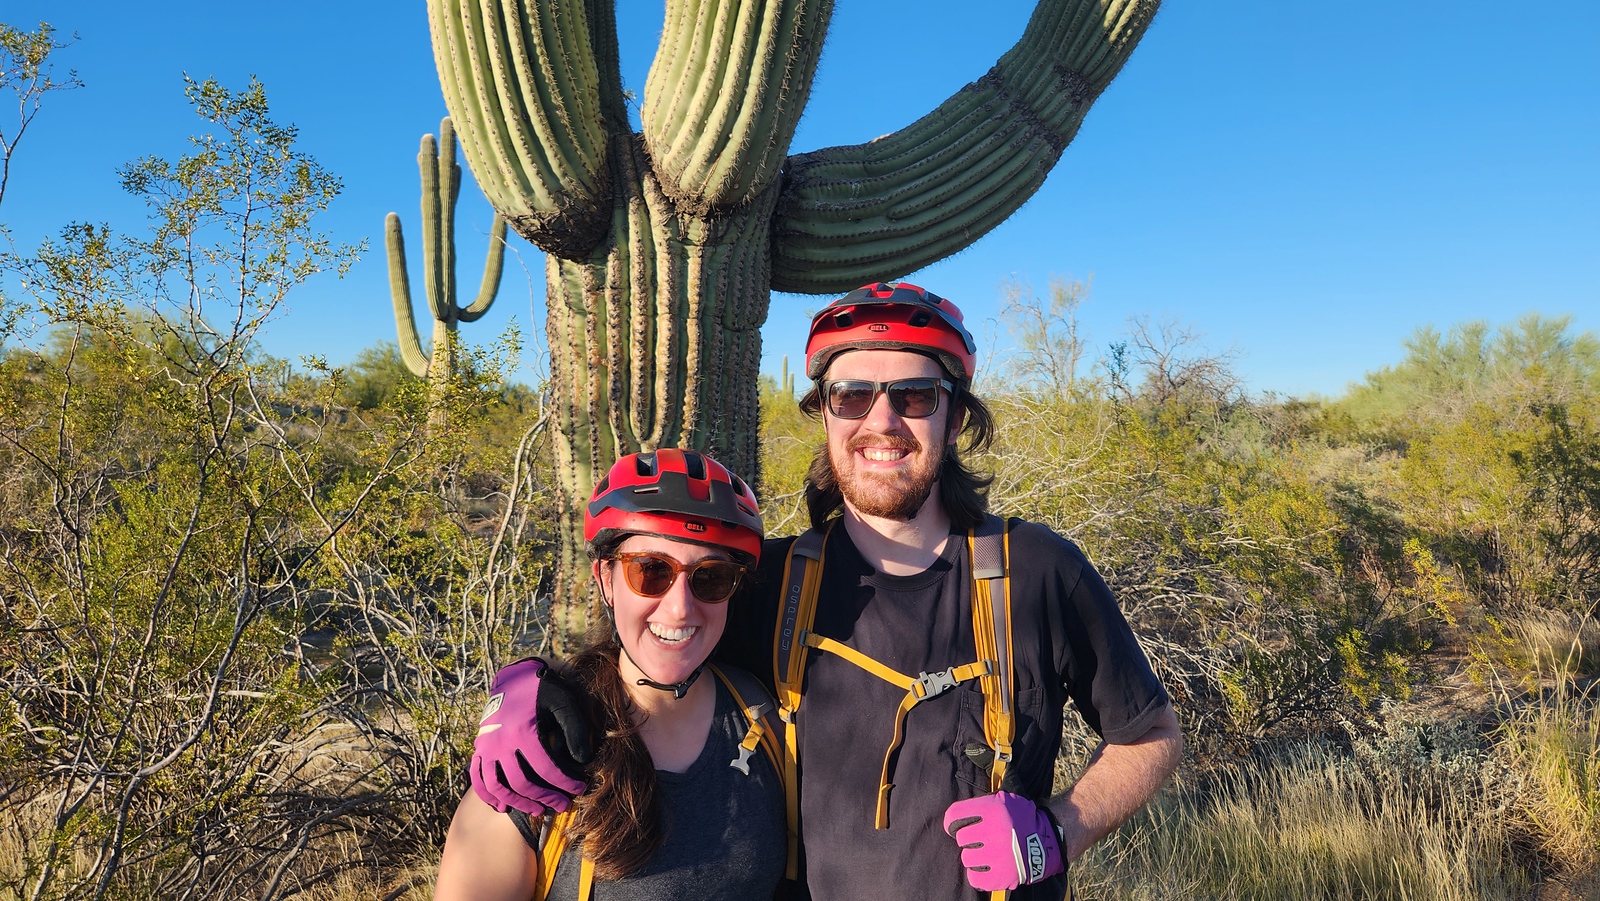 A happy pair pose with a Saguaro Cactus during one of the sunset Phoenix adventure tours with the Wild Bunch.